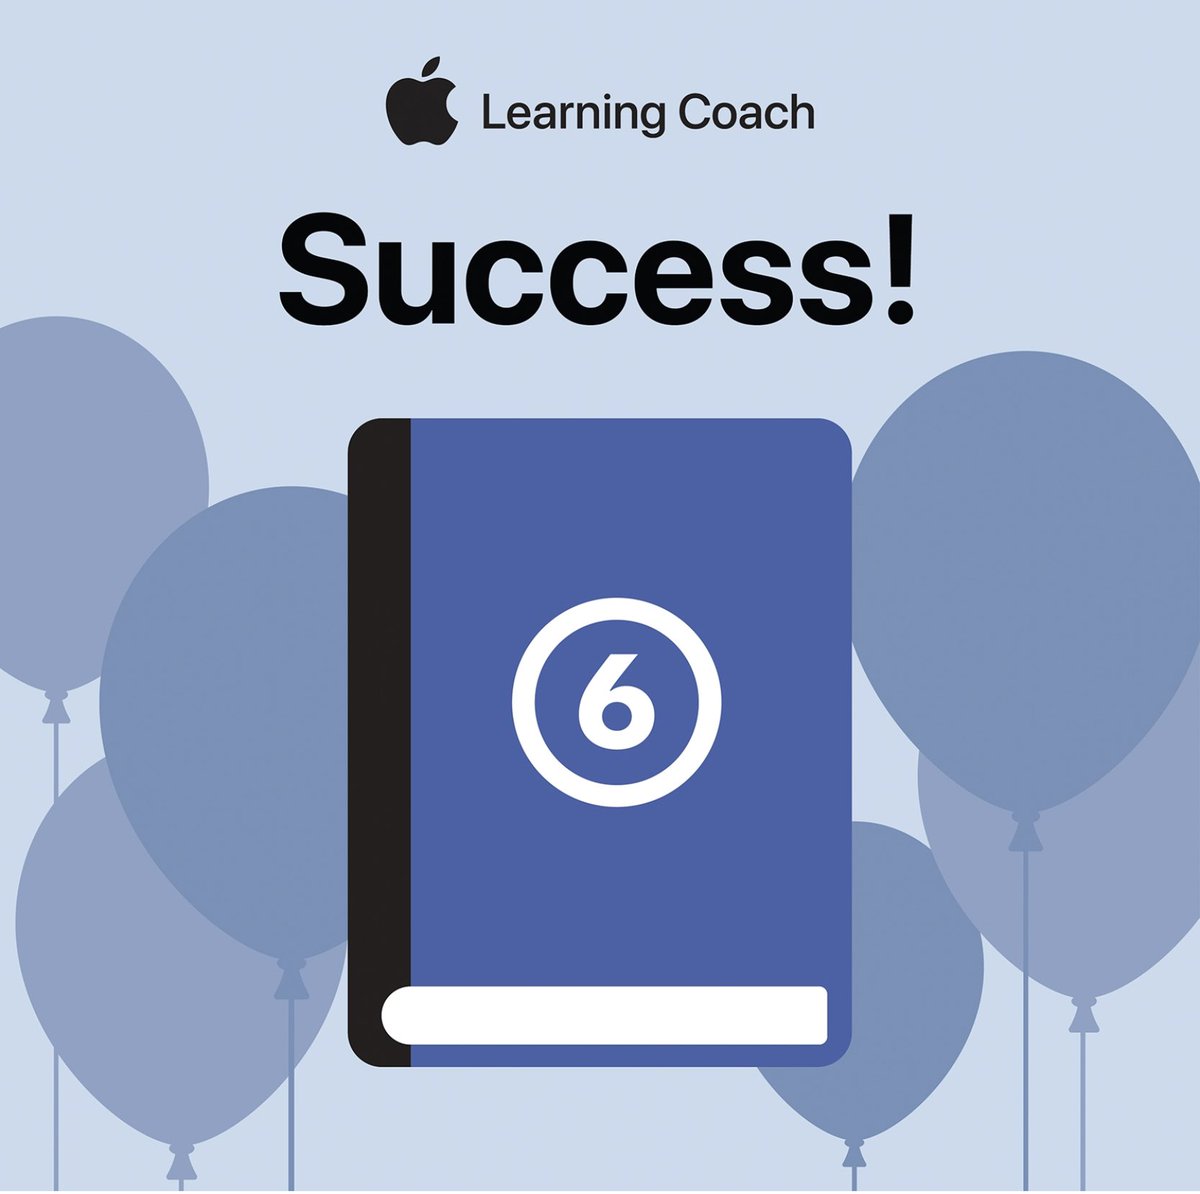 It’s DONE! Literally more time spent on this than my dissertation 😂 @AppleEDU #Applelearningcoach